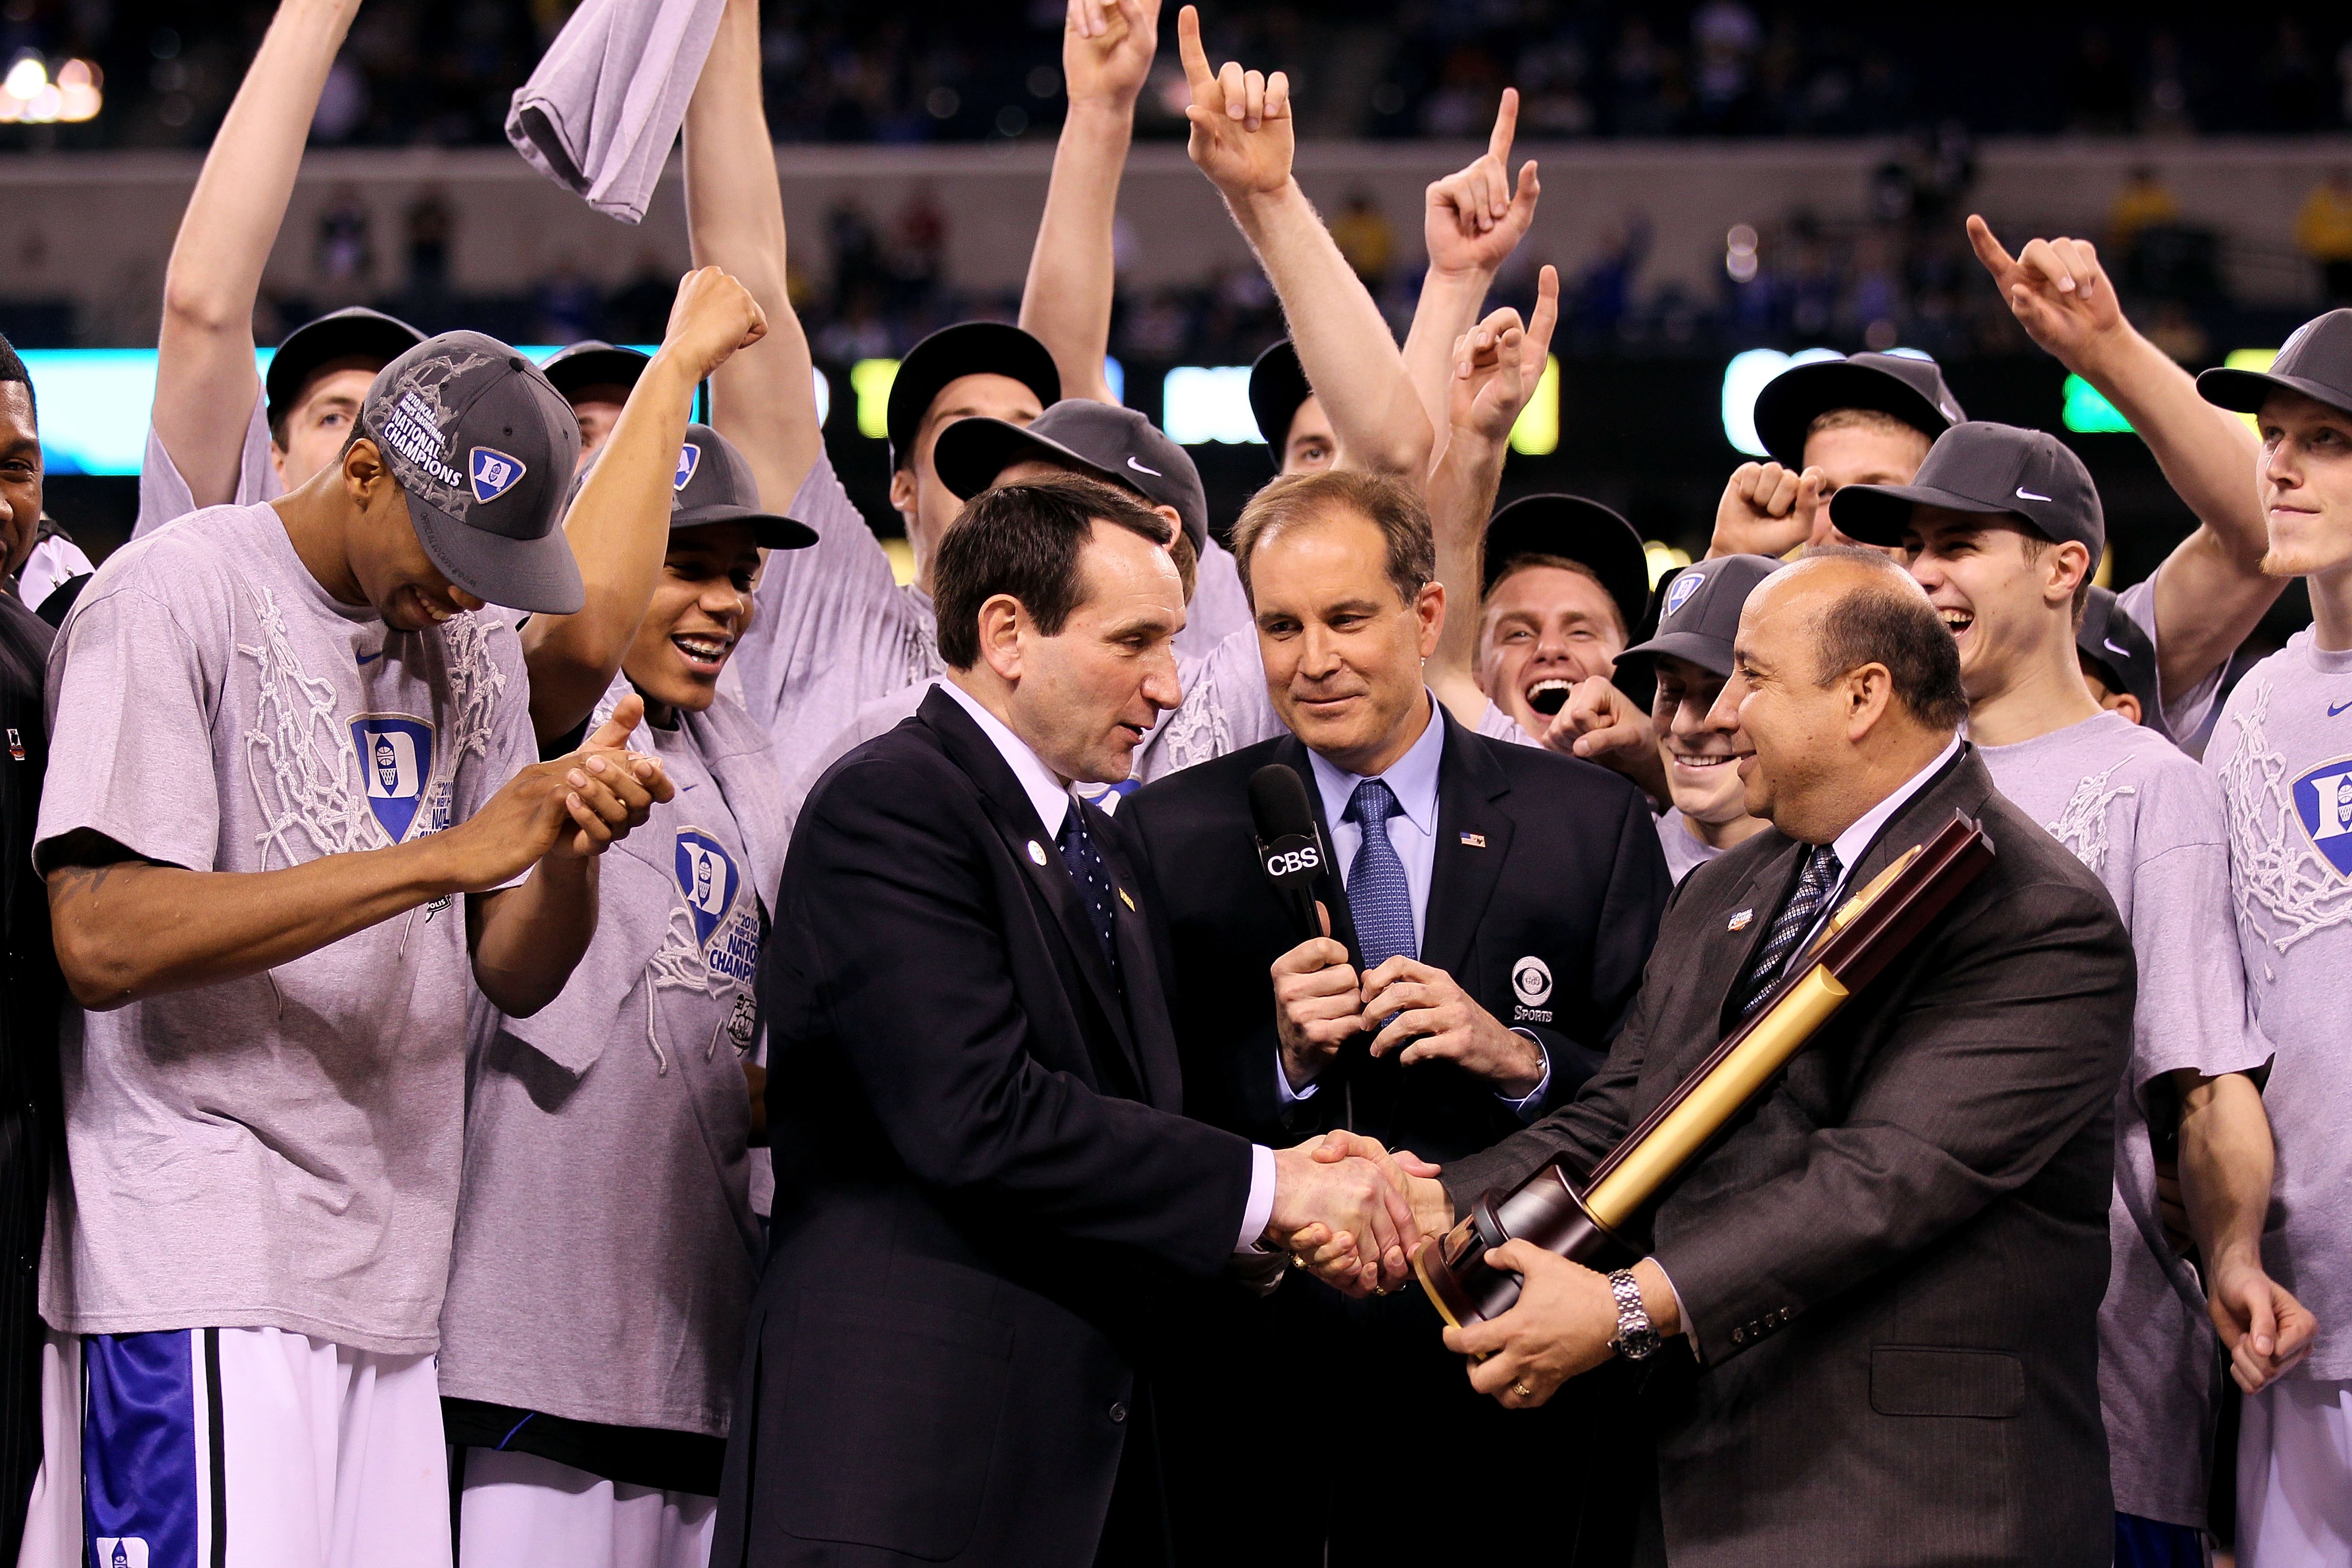 INDIANAPOLIS - APRIL 05:  Head coach Mike Krzyzewski of the Duke Blue Devils receives the trophy as his players celebrate after they won 61-59 against the Butler Bulldogs during the 2010 NCAA Division I Men's Basketball National Championship game at Lucas